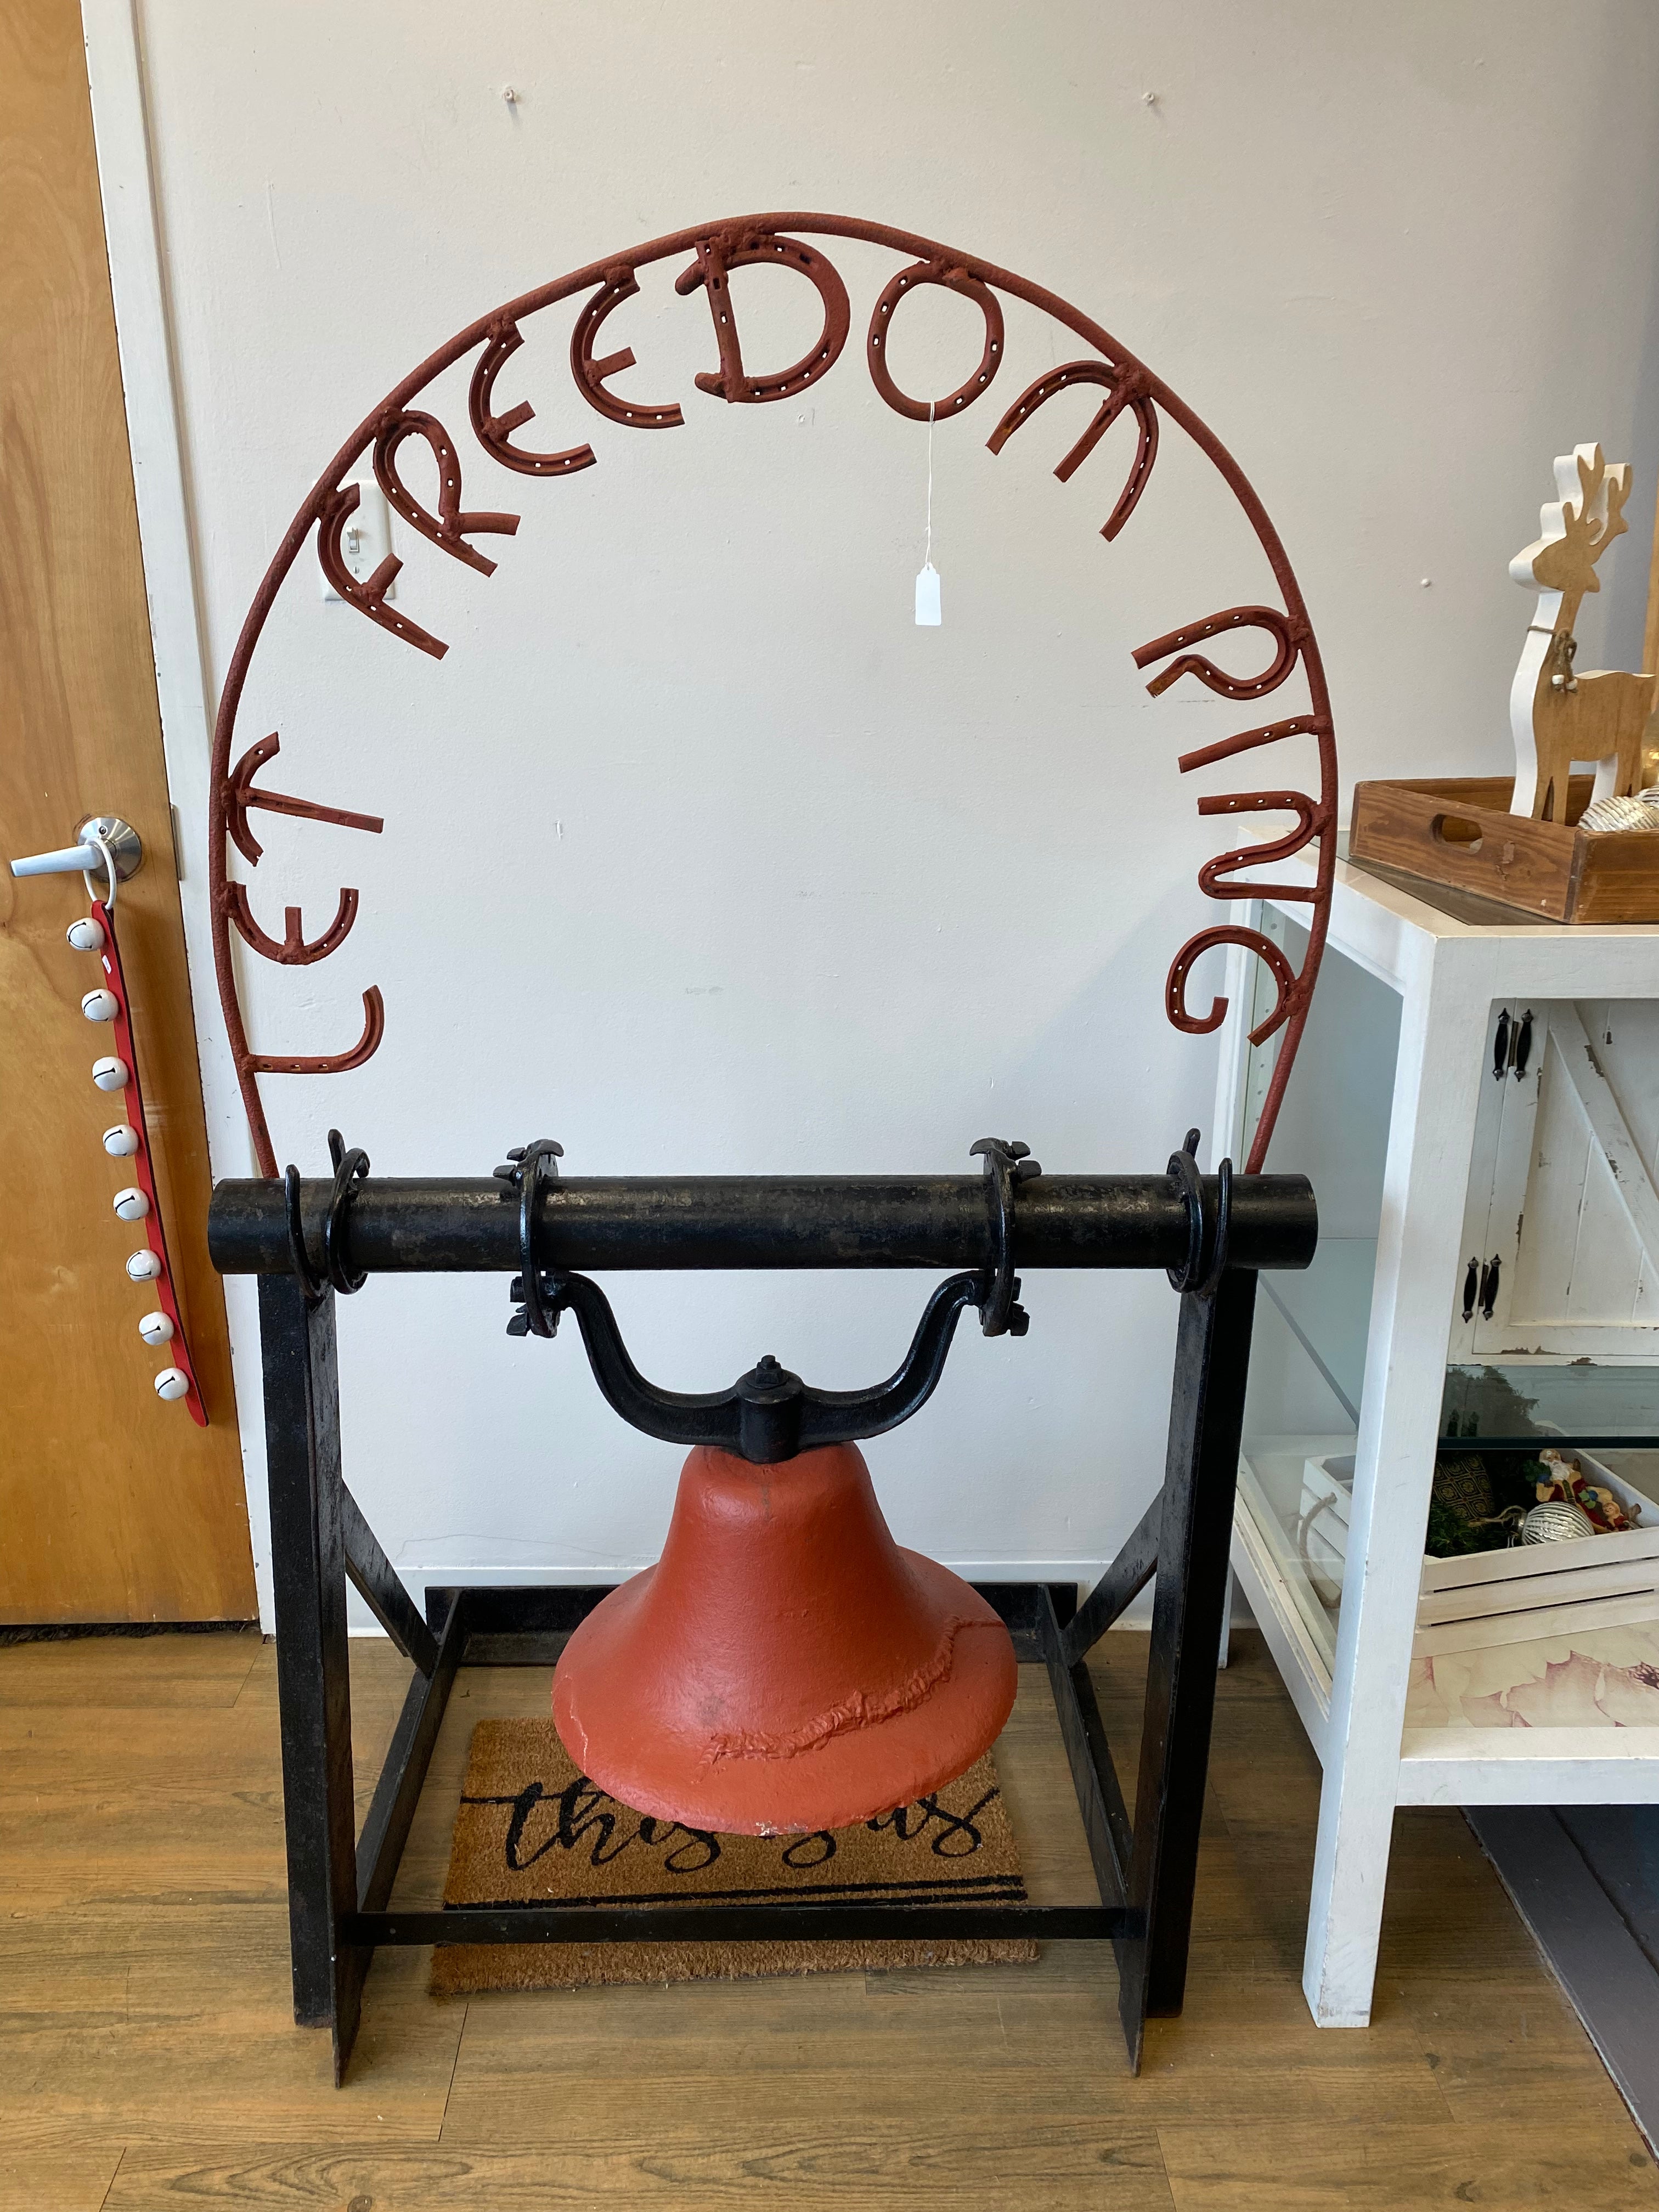 “Let freedom ring” solid cast iron decorative bell